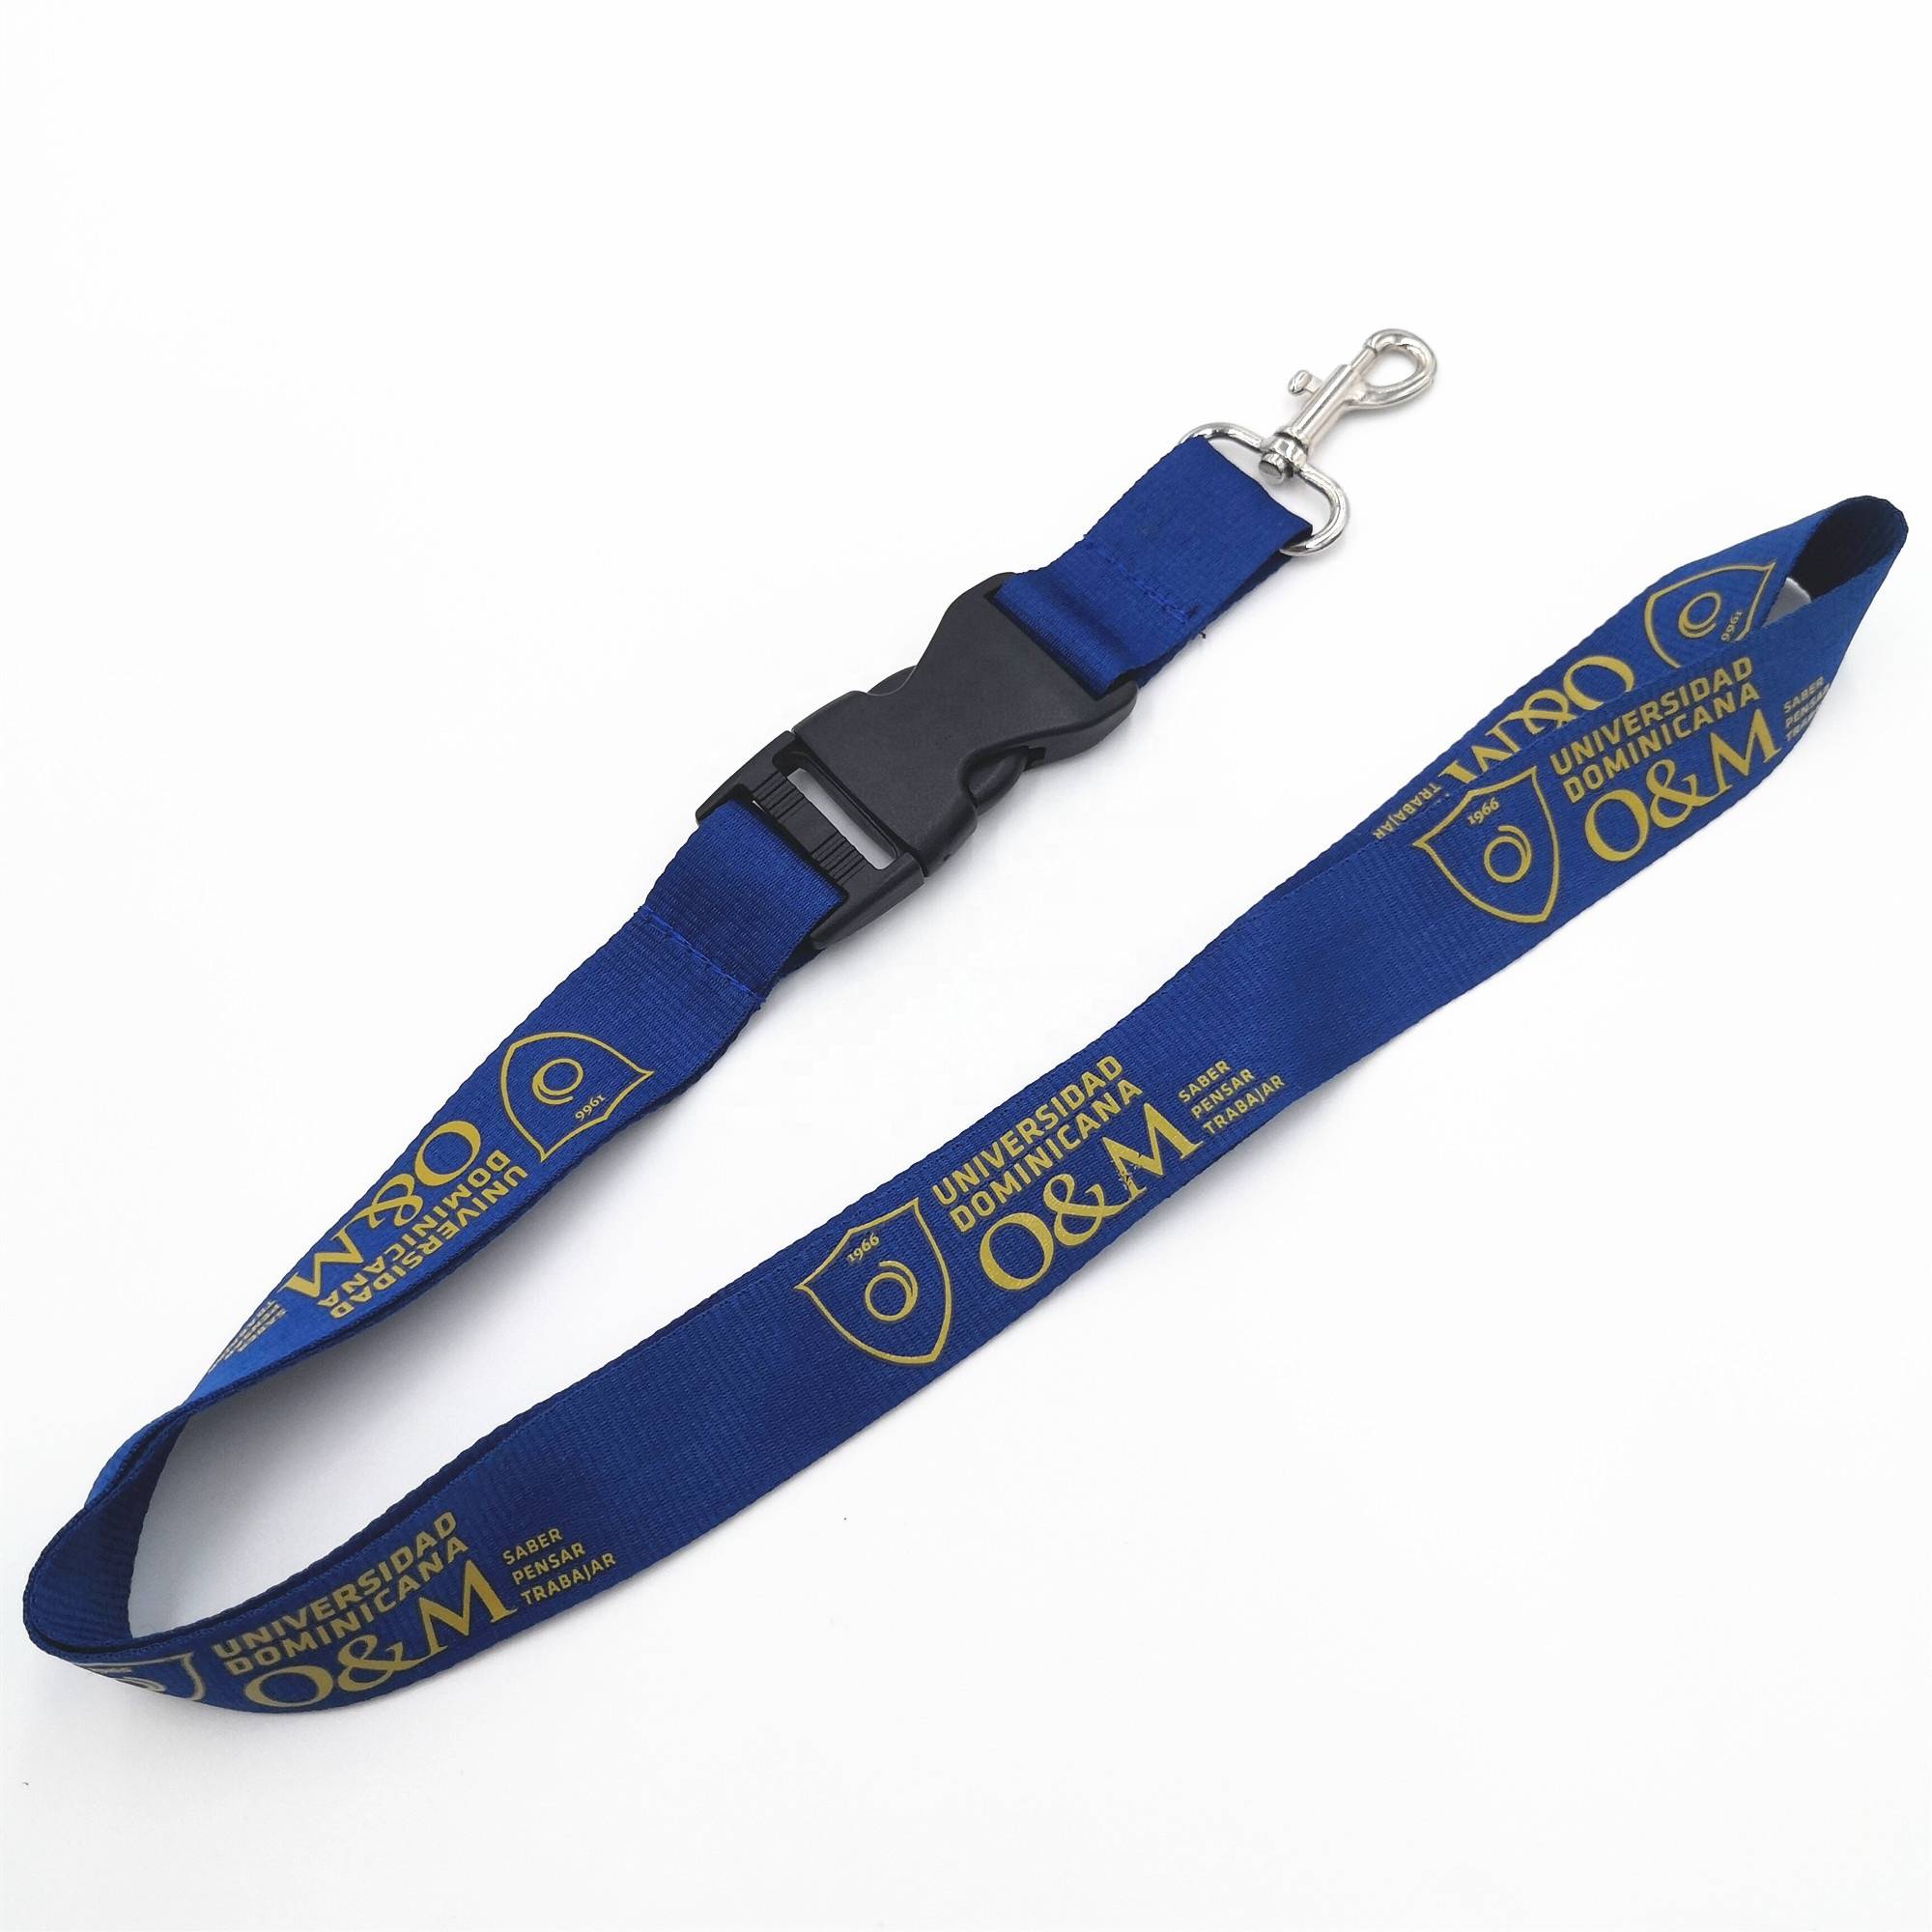 High Quality Floral Printing Lanyard - Good presentation polyester dog hook lanyard with company information – Bison